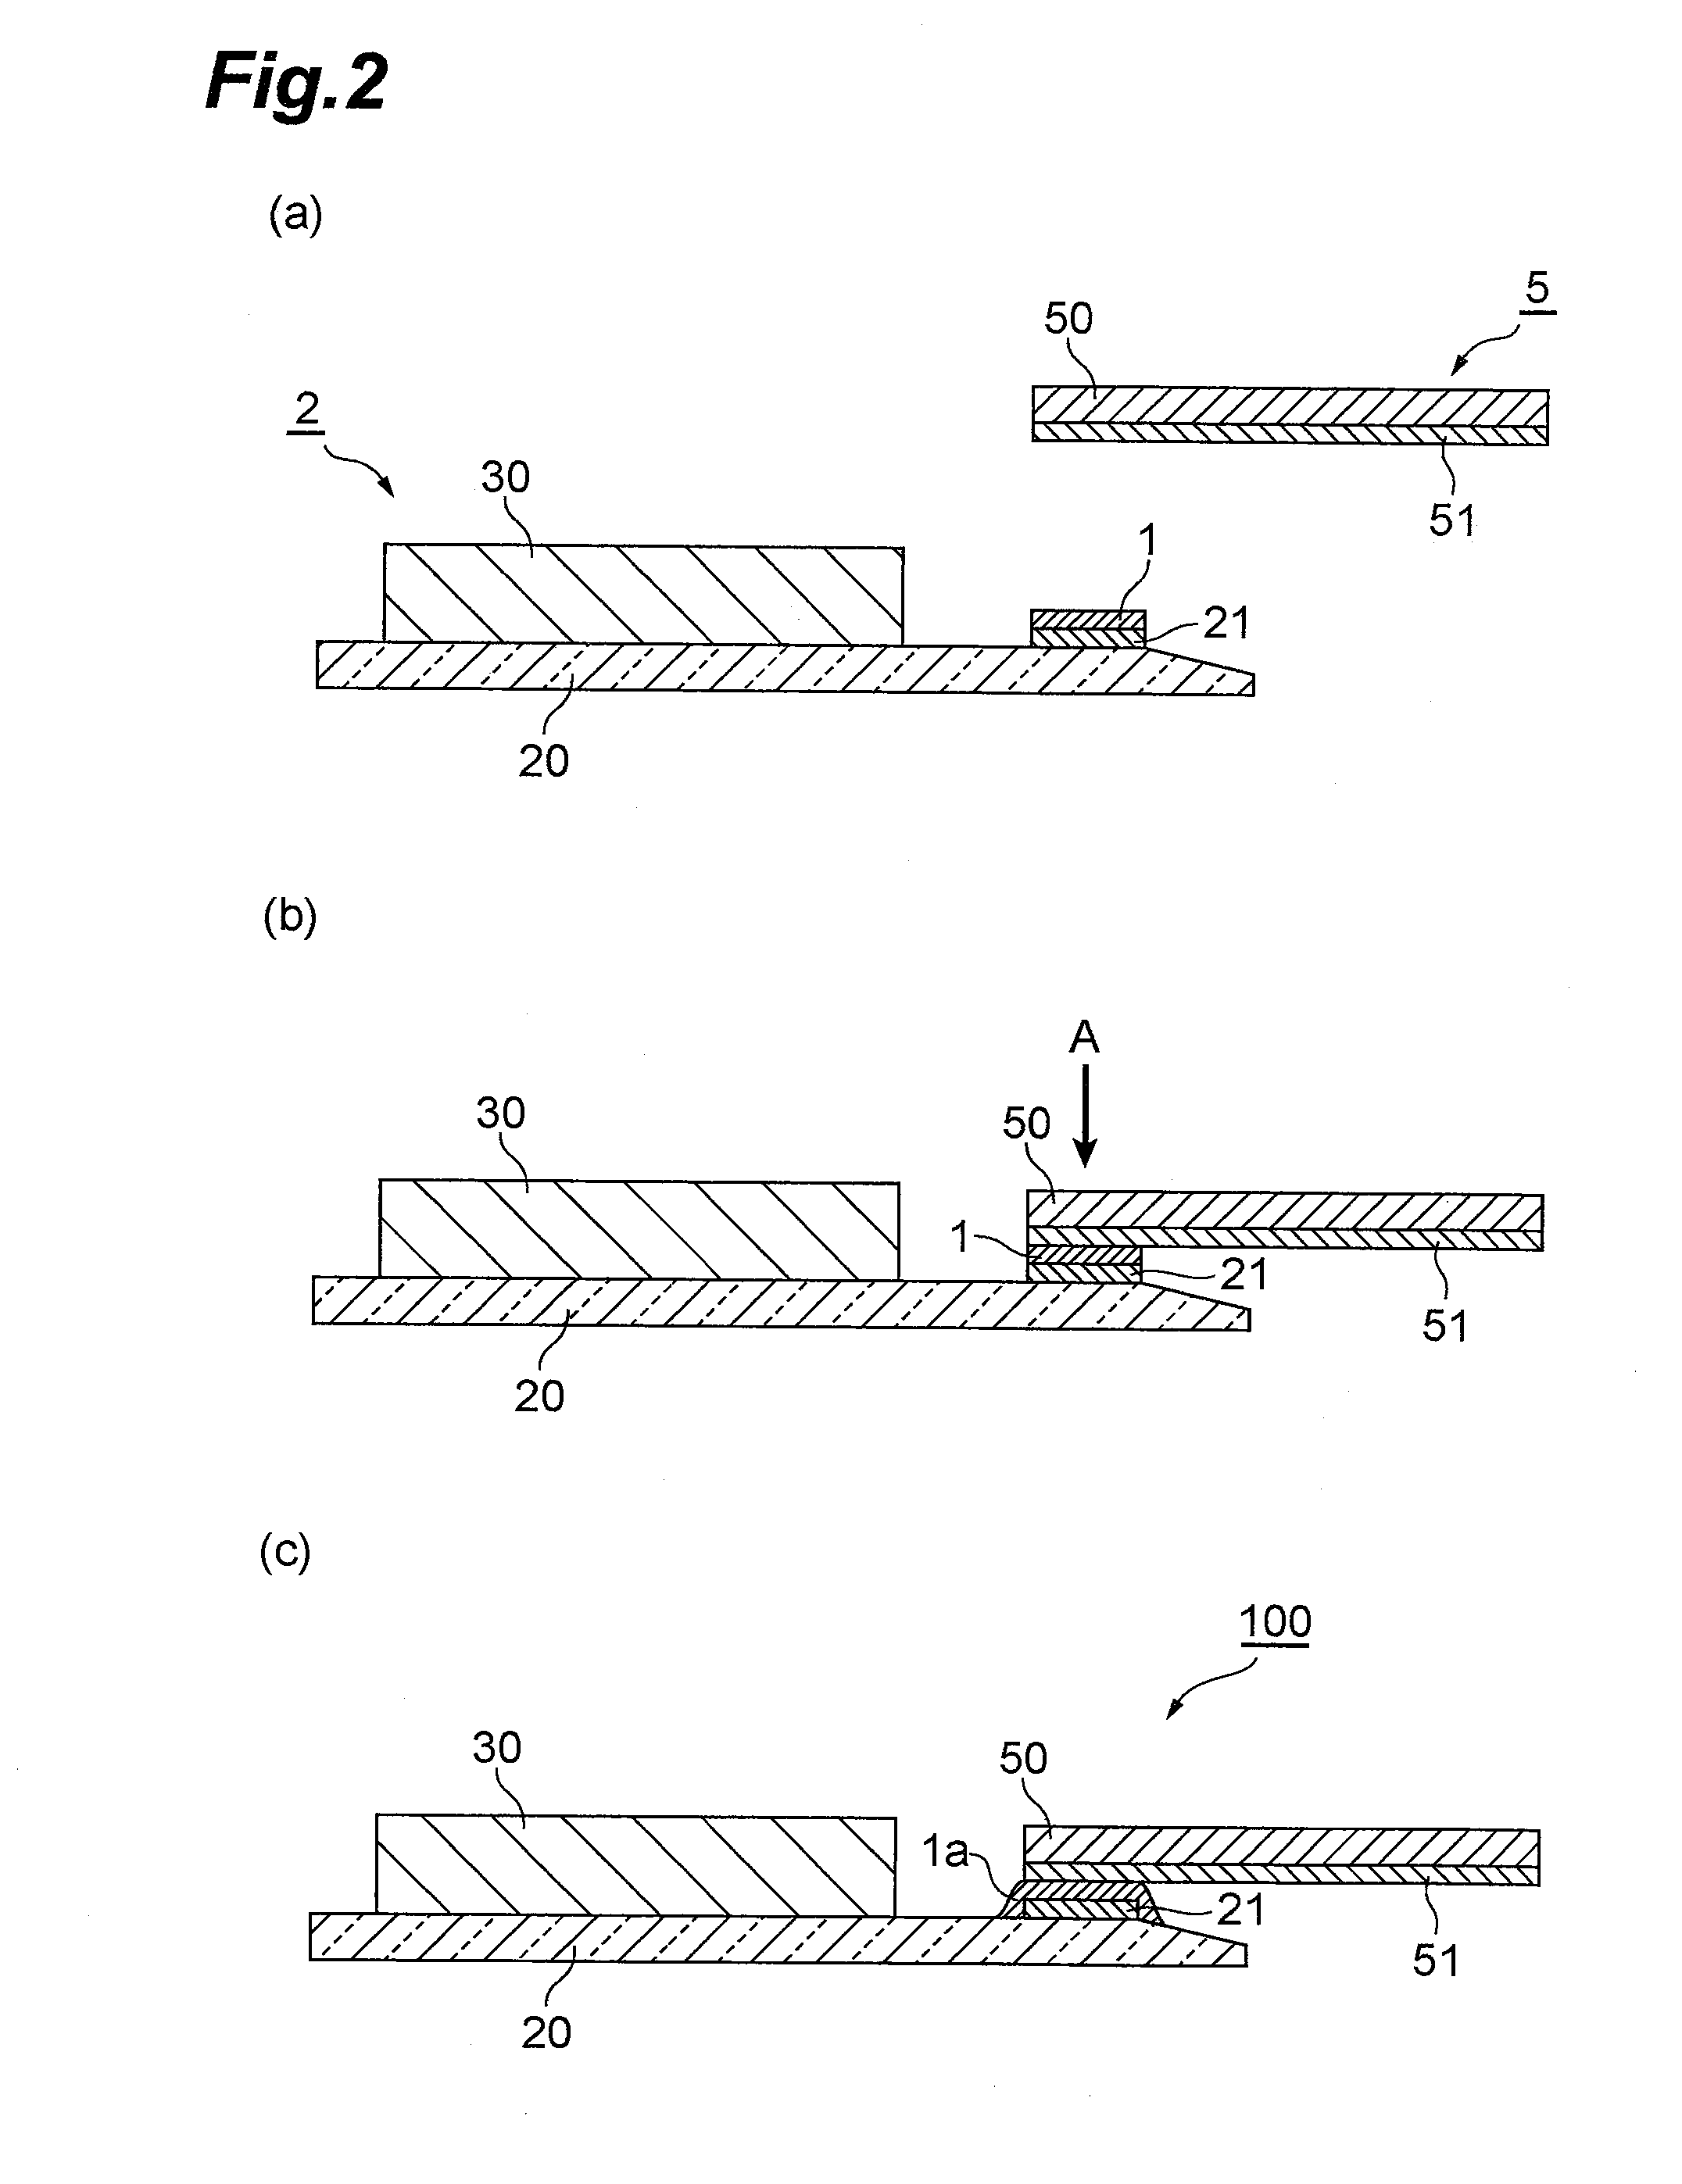 Circuit connecting adhesive film and circuit connecting structure